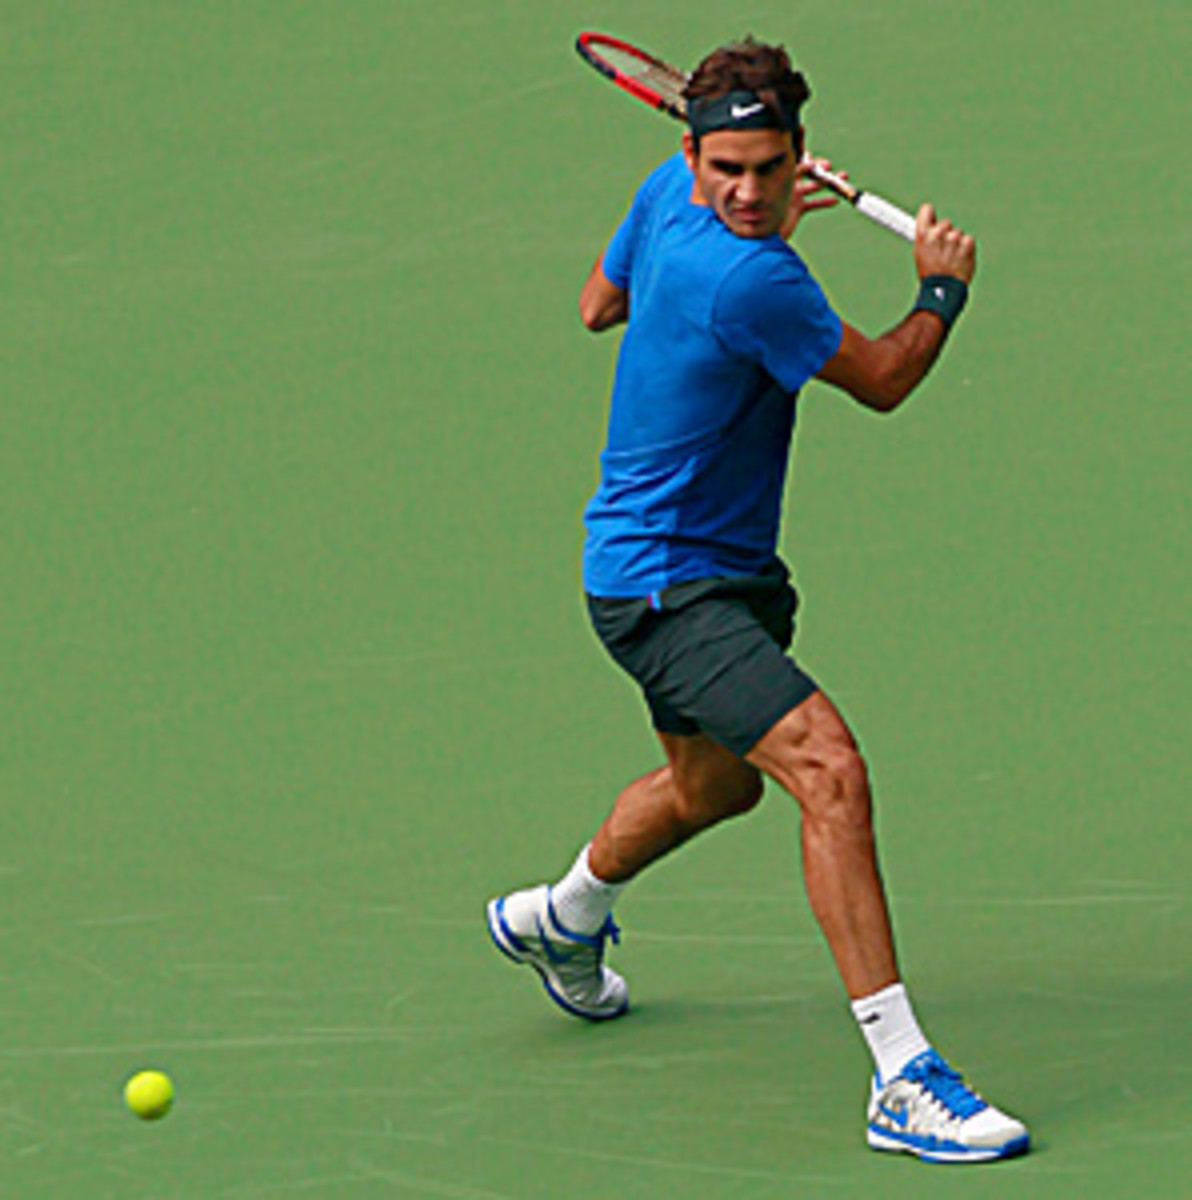 Top seed Roger Federer has received a bye into the second round.